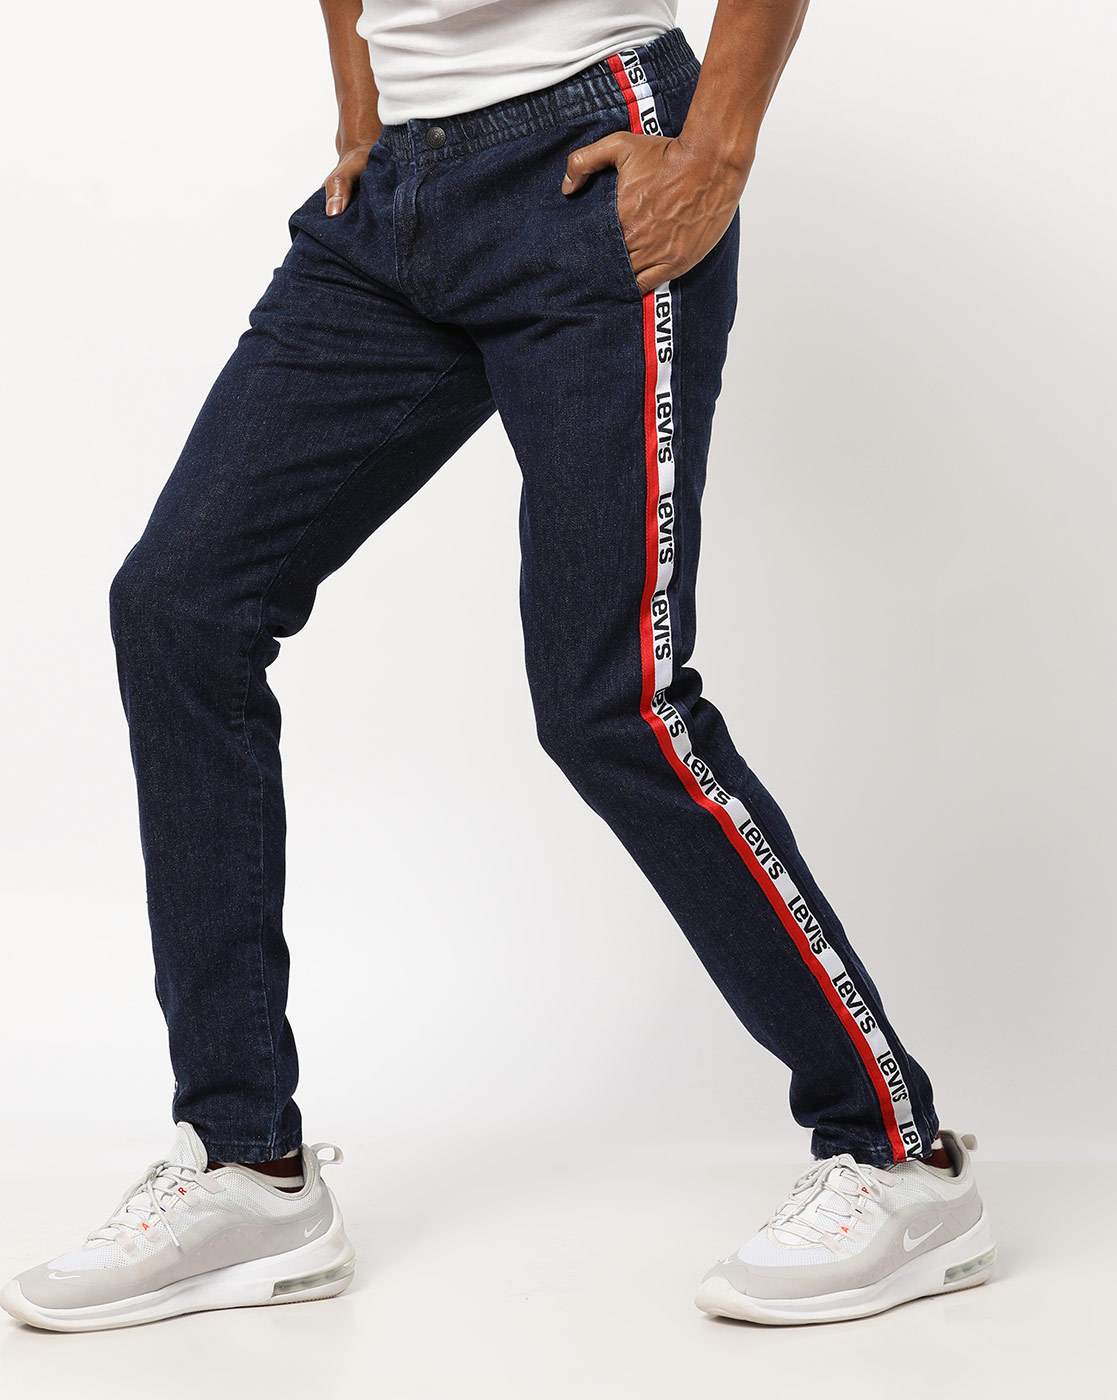 jeans with stripes men